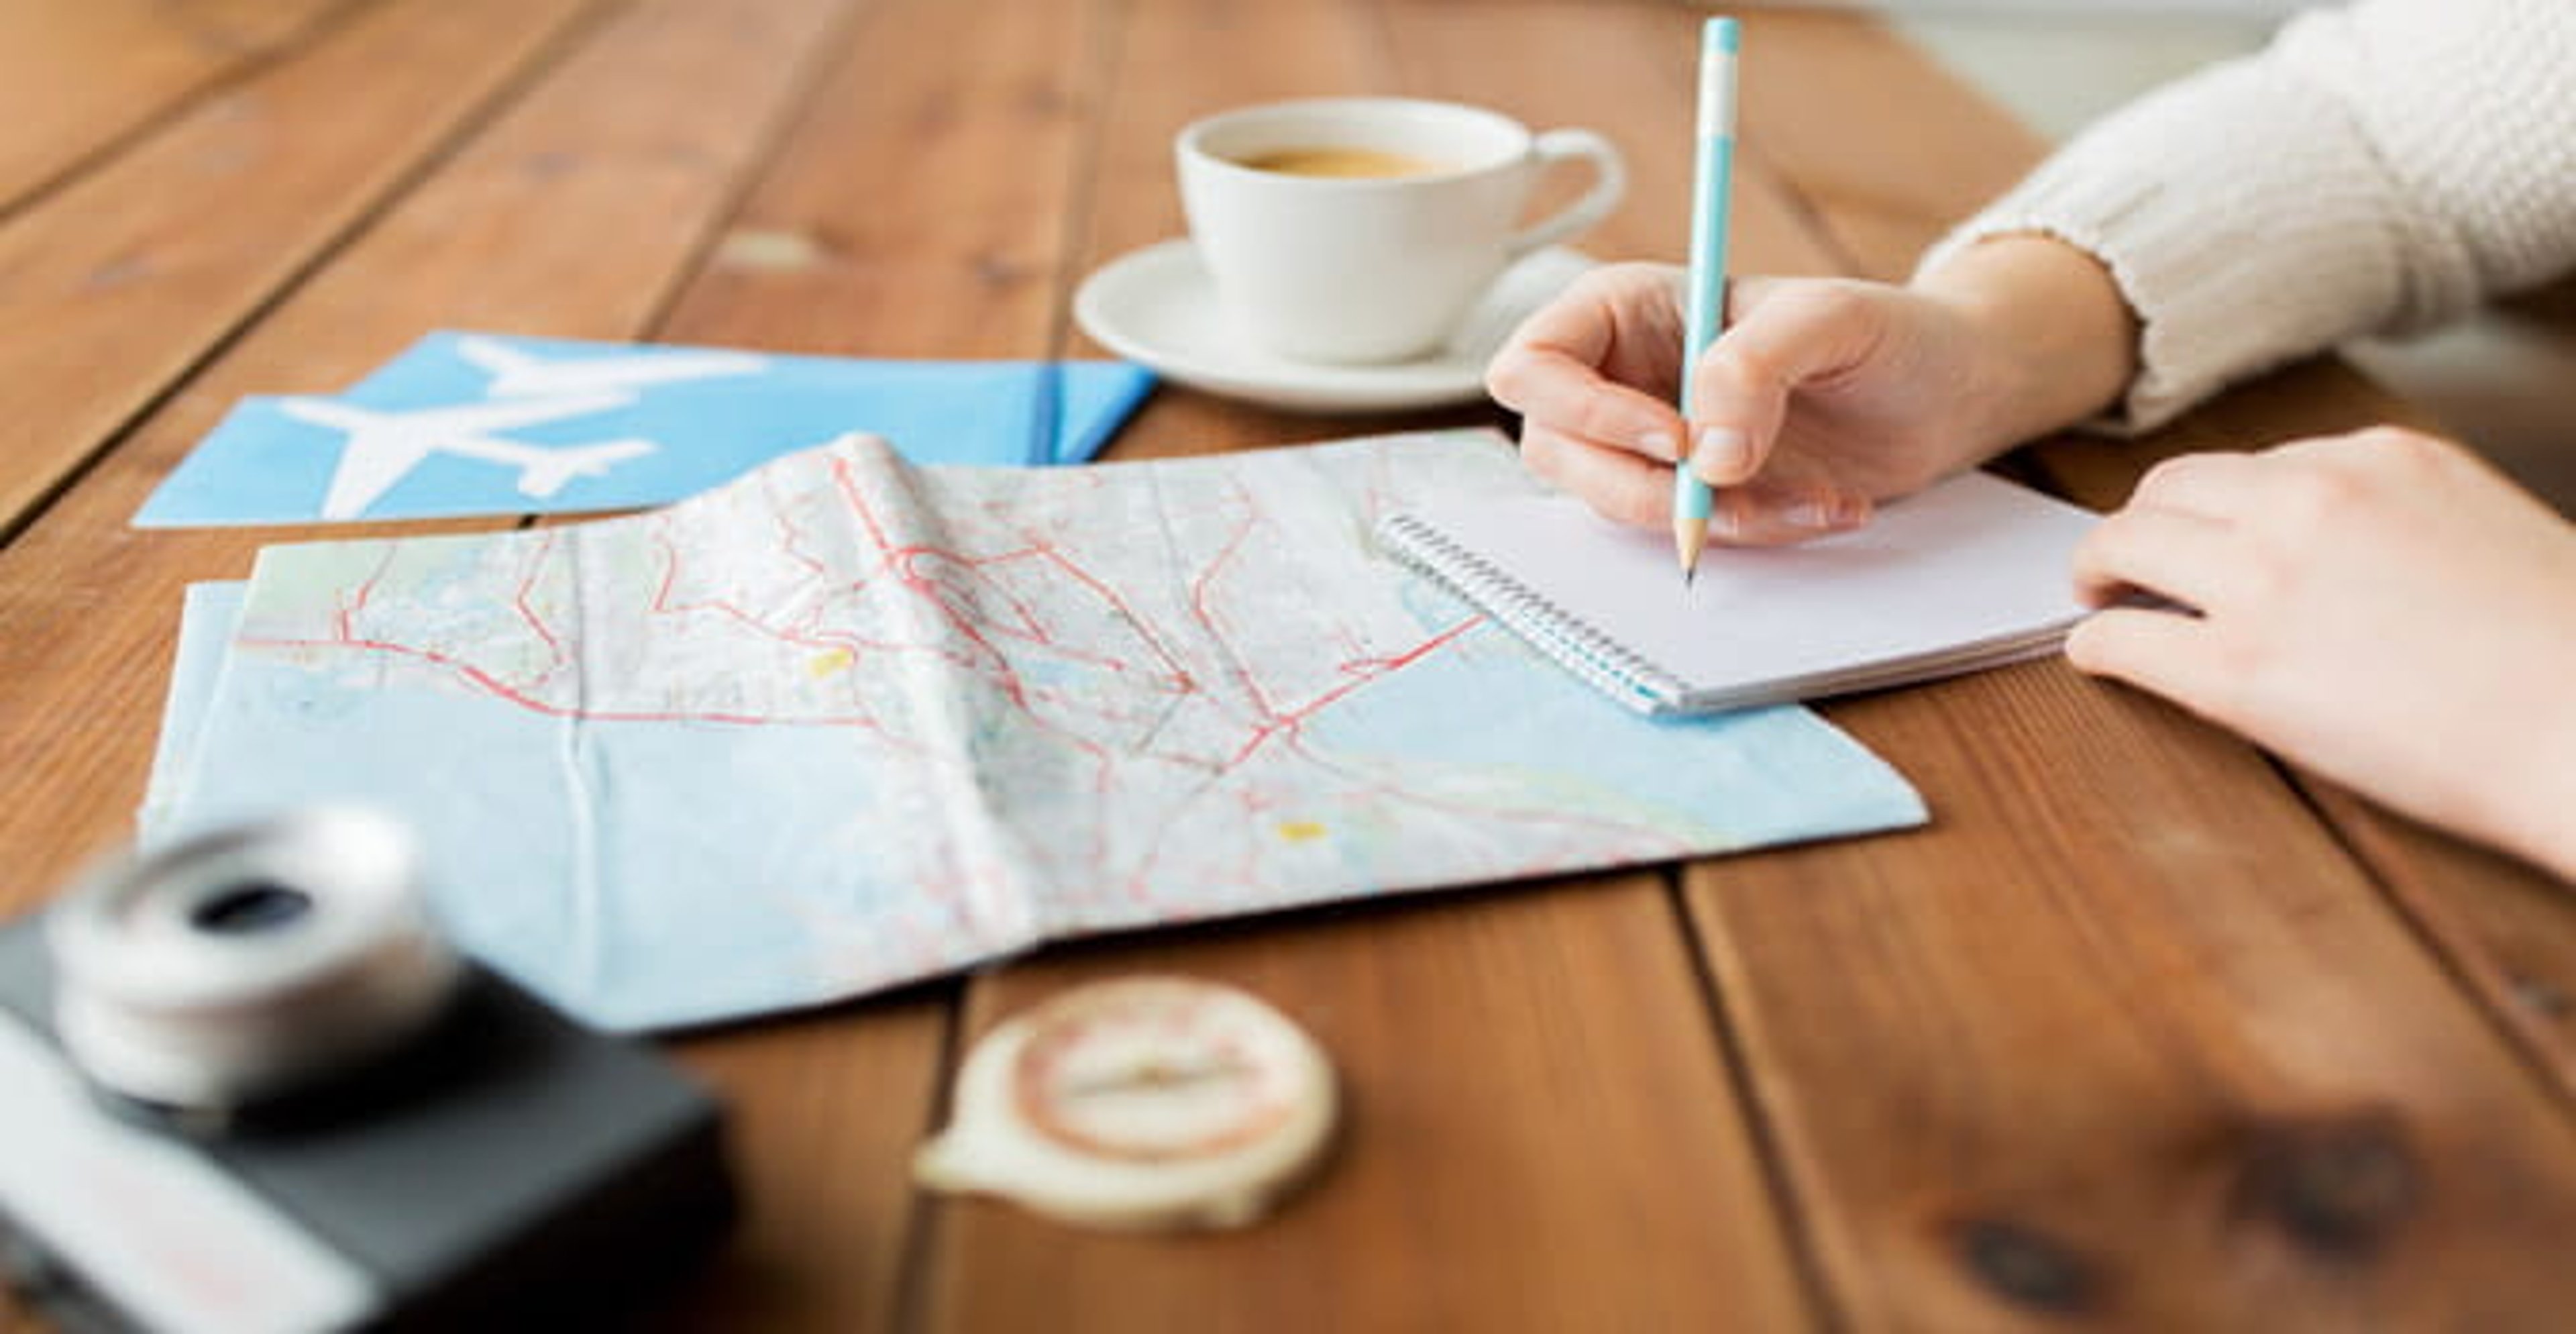 A person writing a note on a table surrounded by a map, documents, camera, and a cup of coffee